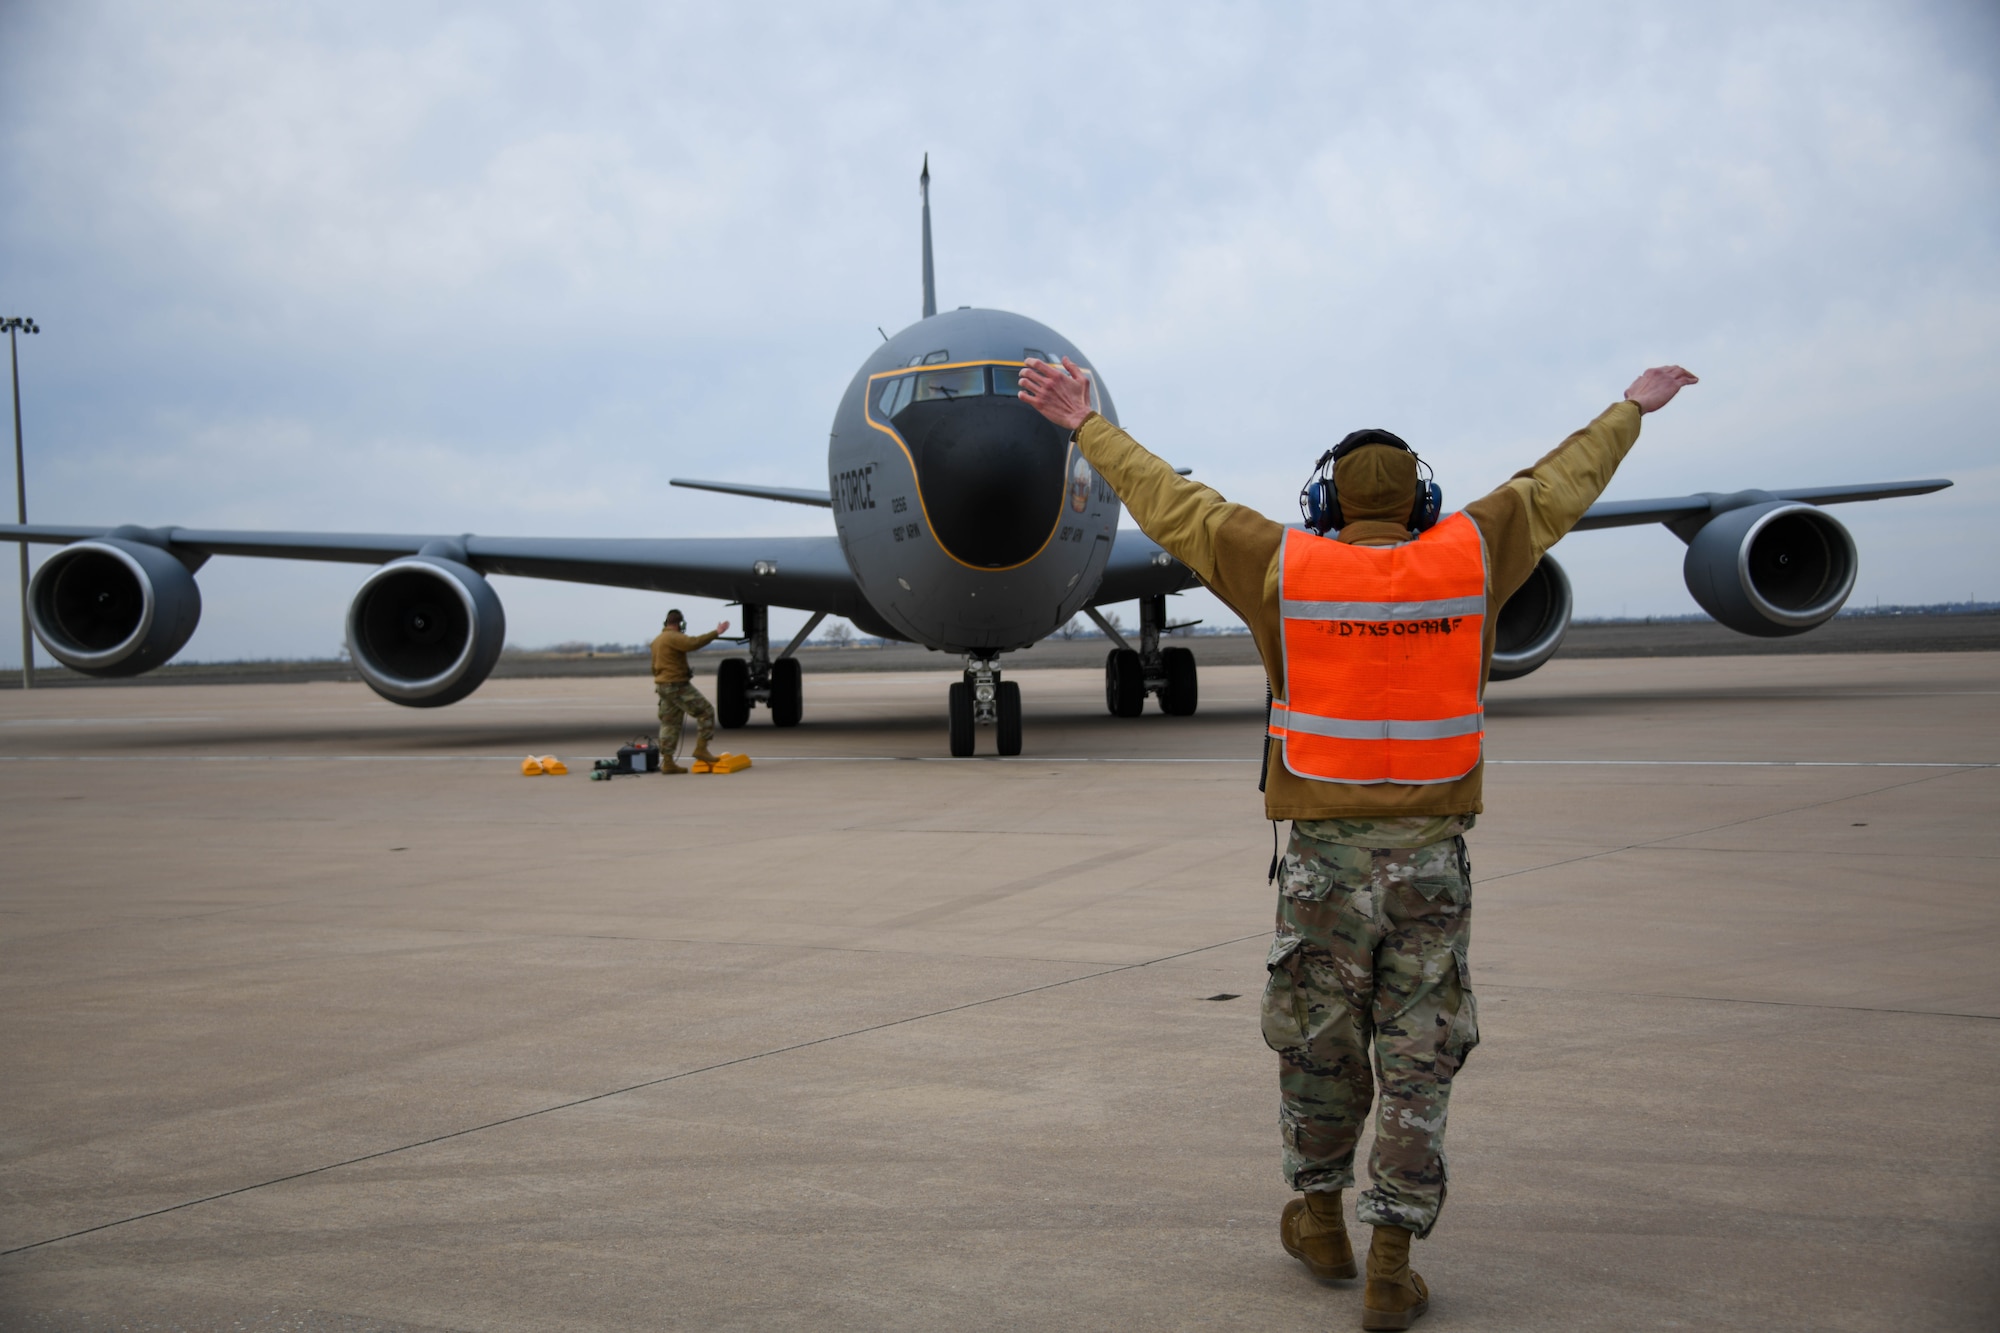 U.S. Air Force Tech. Sgt. Eric Landis, 190th Aircraft Maintenance Squadron (AMXS) crew chief, taxis in a KC-135 Stratotanker at Altus Air Force Base (AFB), Oklahoma, Feb. 2, 2023. Airmen from the 190th Air Refueling Wing conducted training alongside Altus AFB Airmen to get certification in hot pit refueling. (U.S. Air Force photo by Senior Airman Miyah Gray)